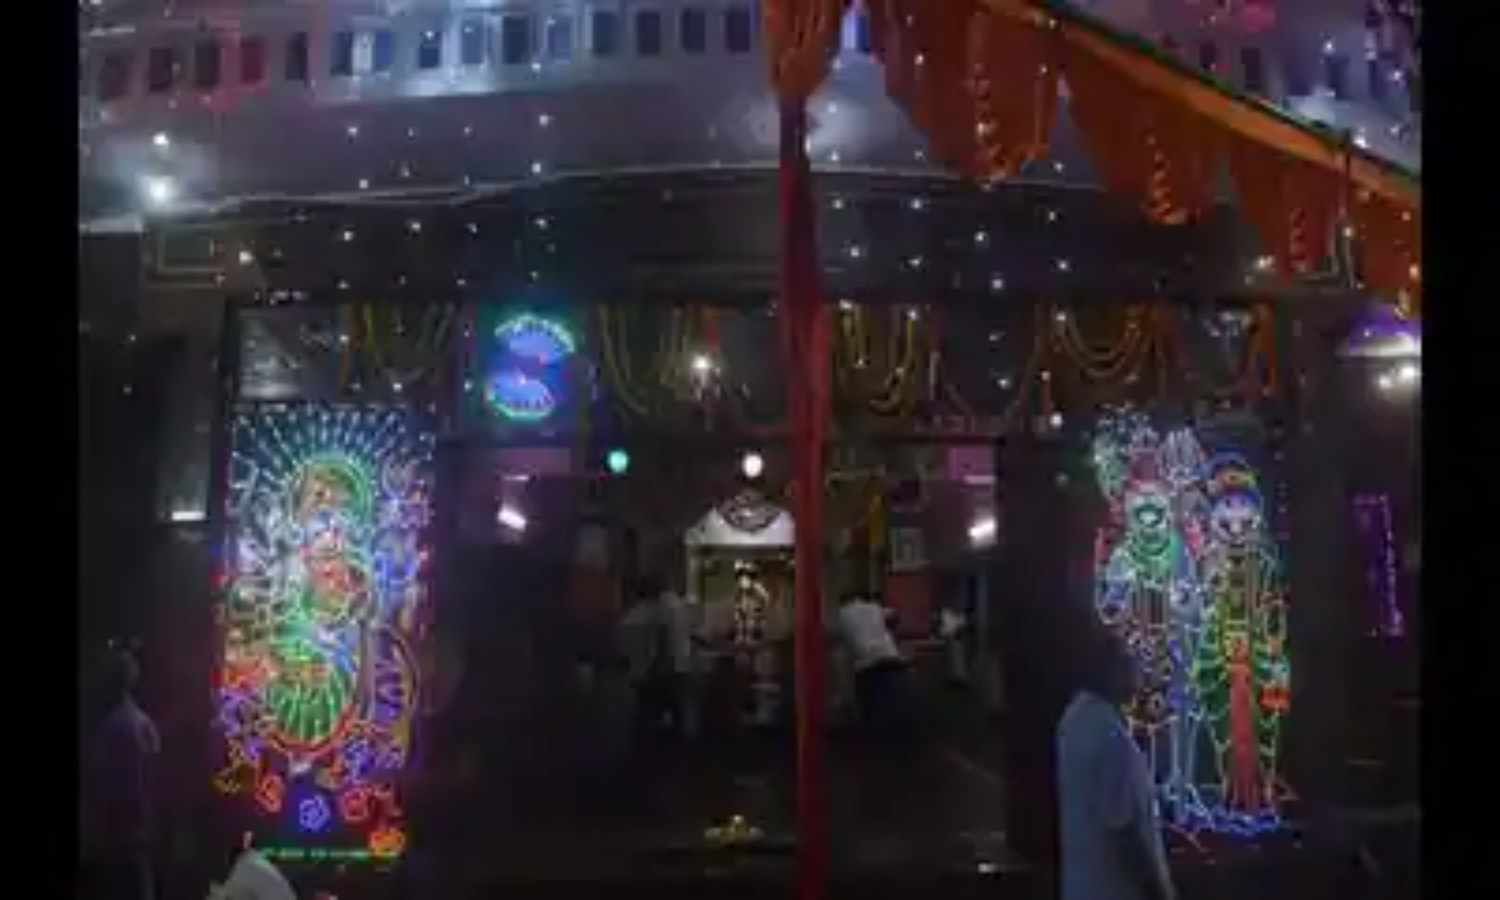 Lucknow Kalibari Temple: On the occasion of Dussehra, grand decoration Kalibari temple of Lucknow attracts devotees with sparkling lights.